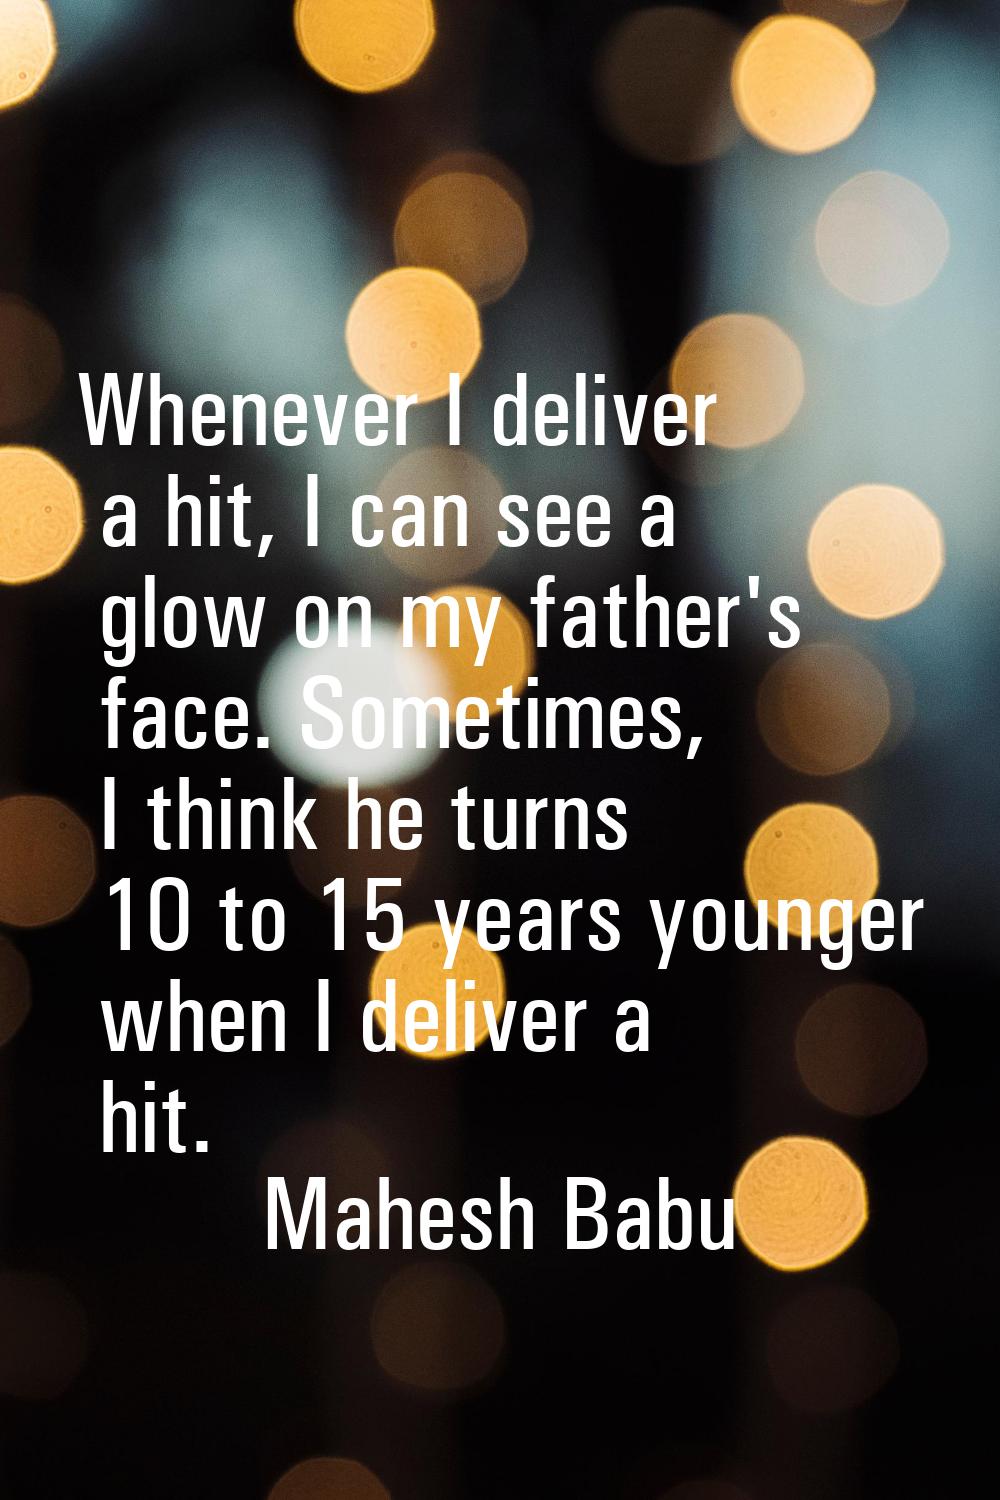 Whenever I deliver a hit, I can see a glow on my father's face. Sometimes, I think he turns 10 to 1